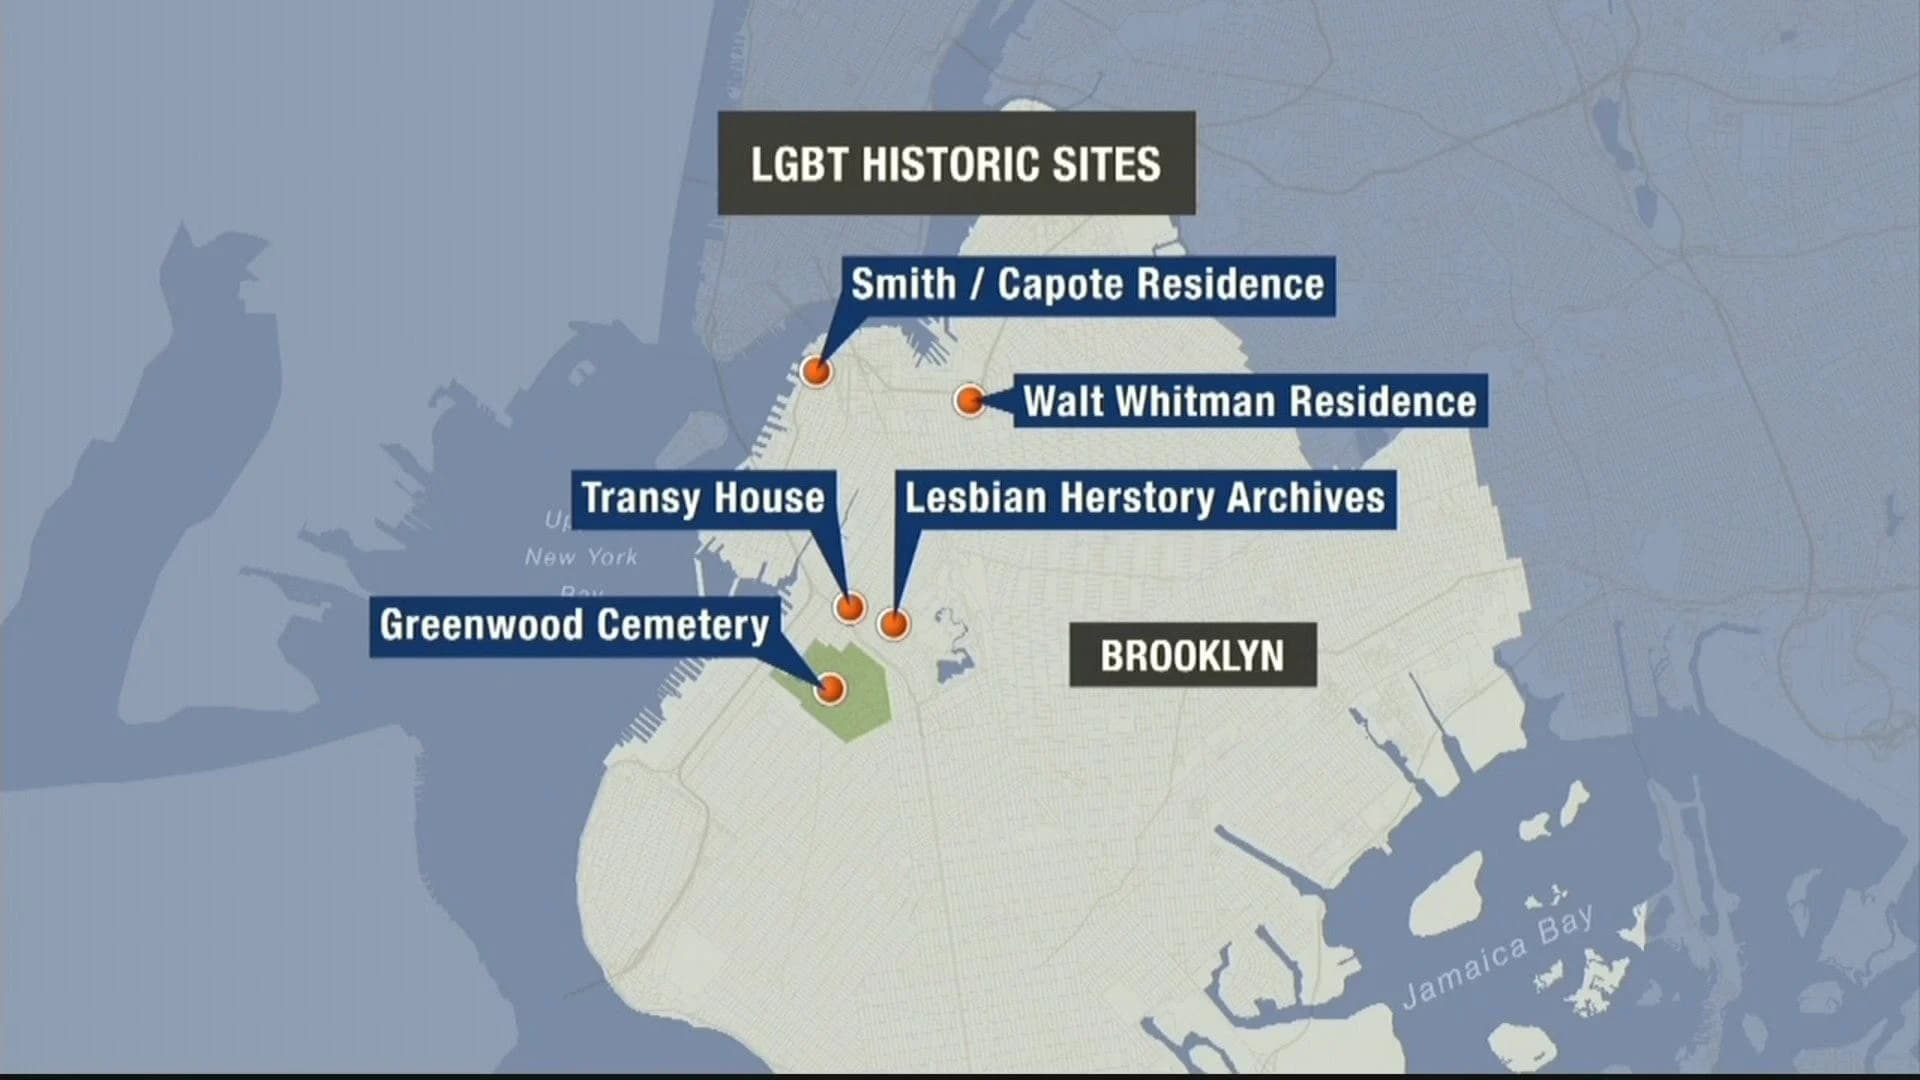 NYC LGBT Historical Sites Project unveils landmark map